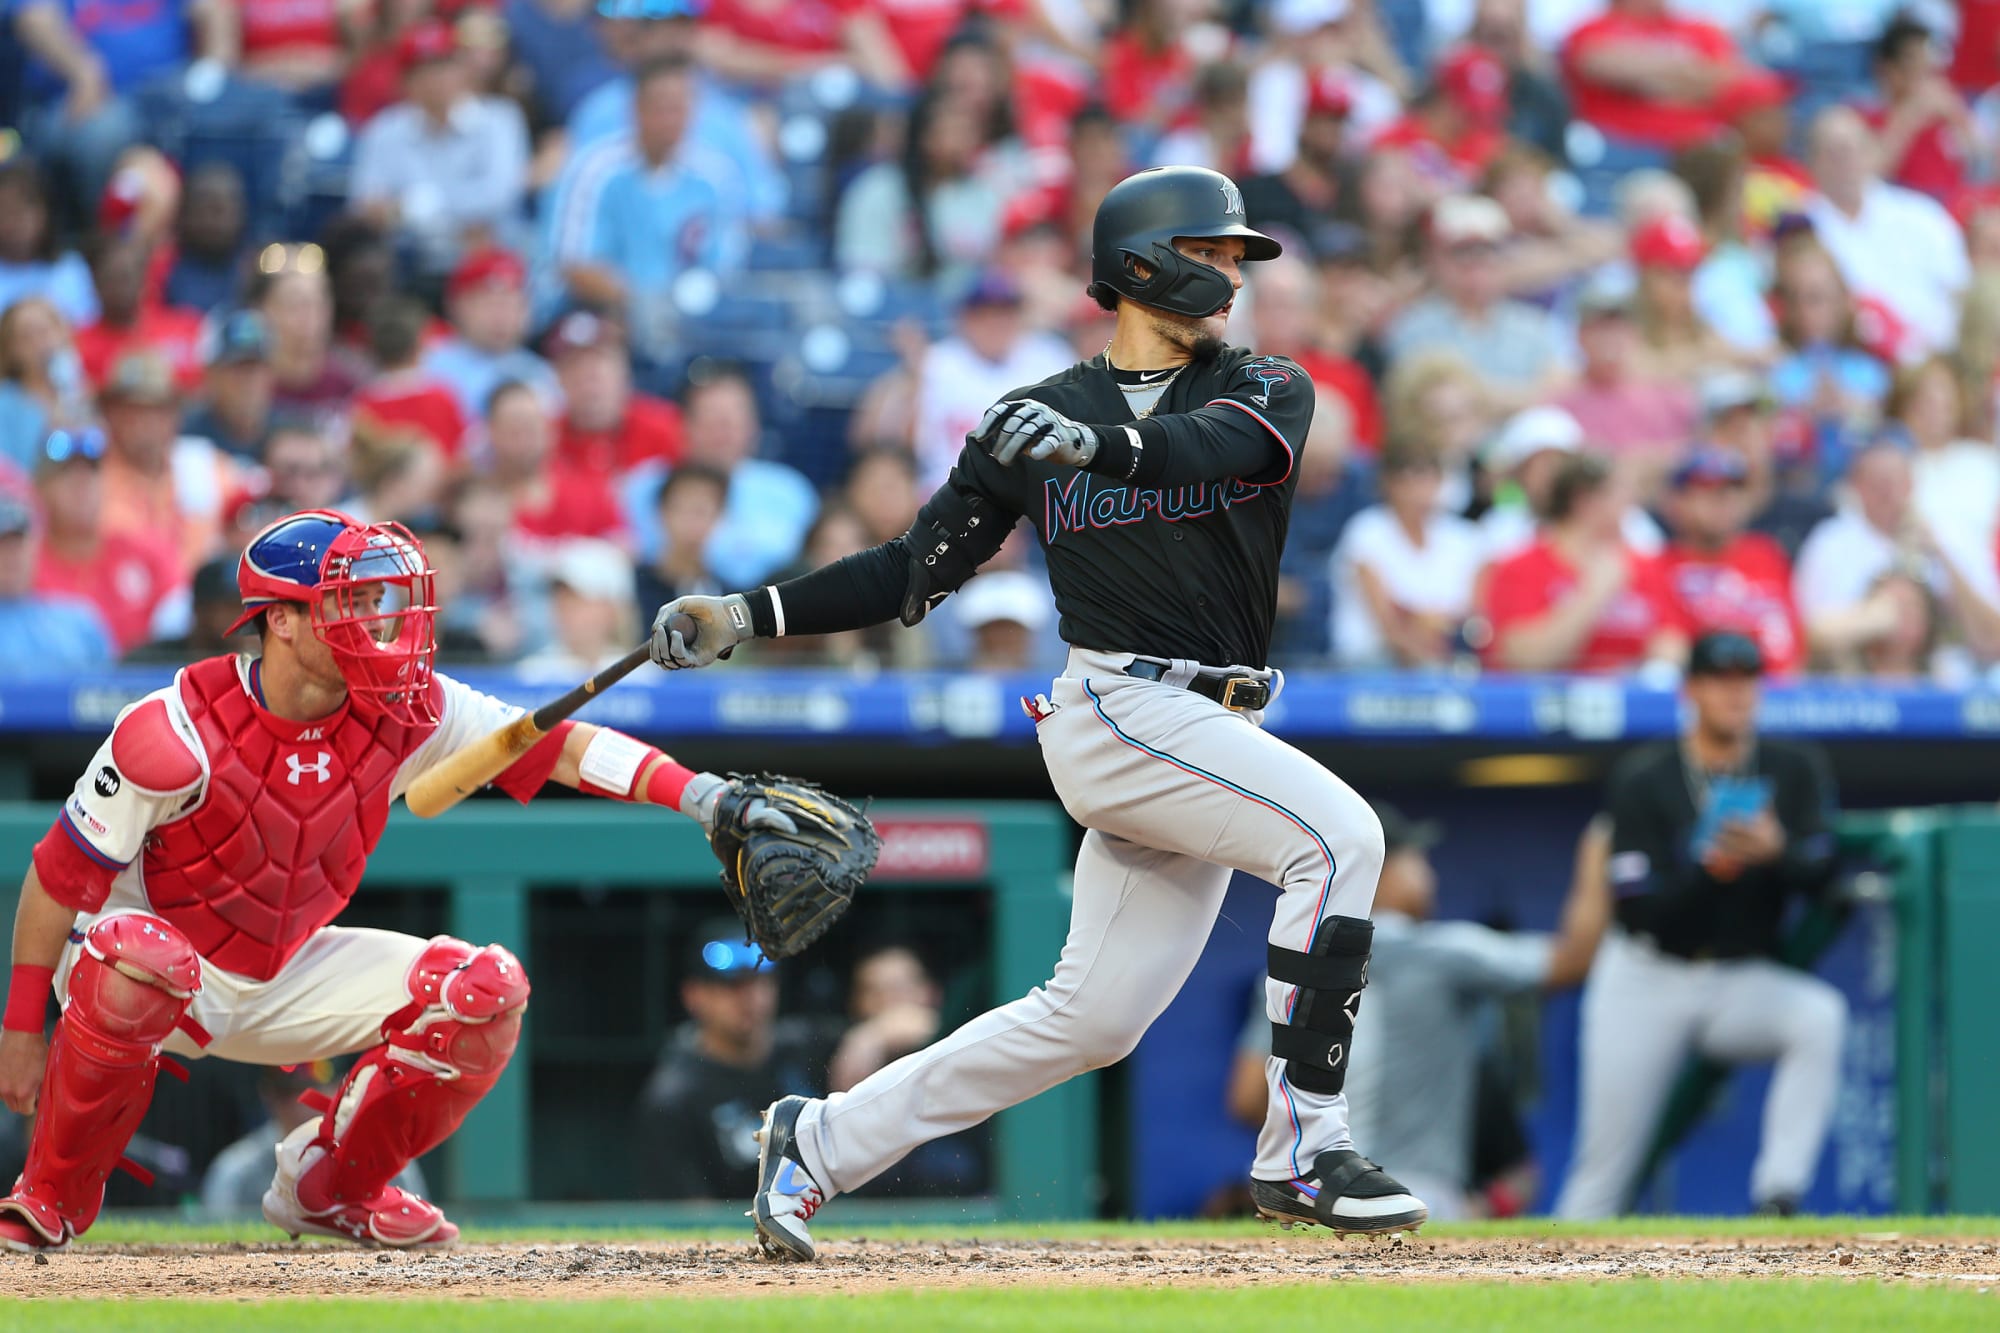 Miami Marlins 2020: Second Baseman Isan Diaz is Coming of Age